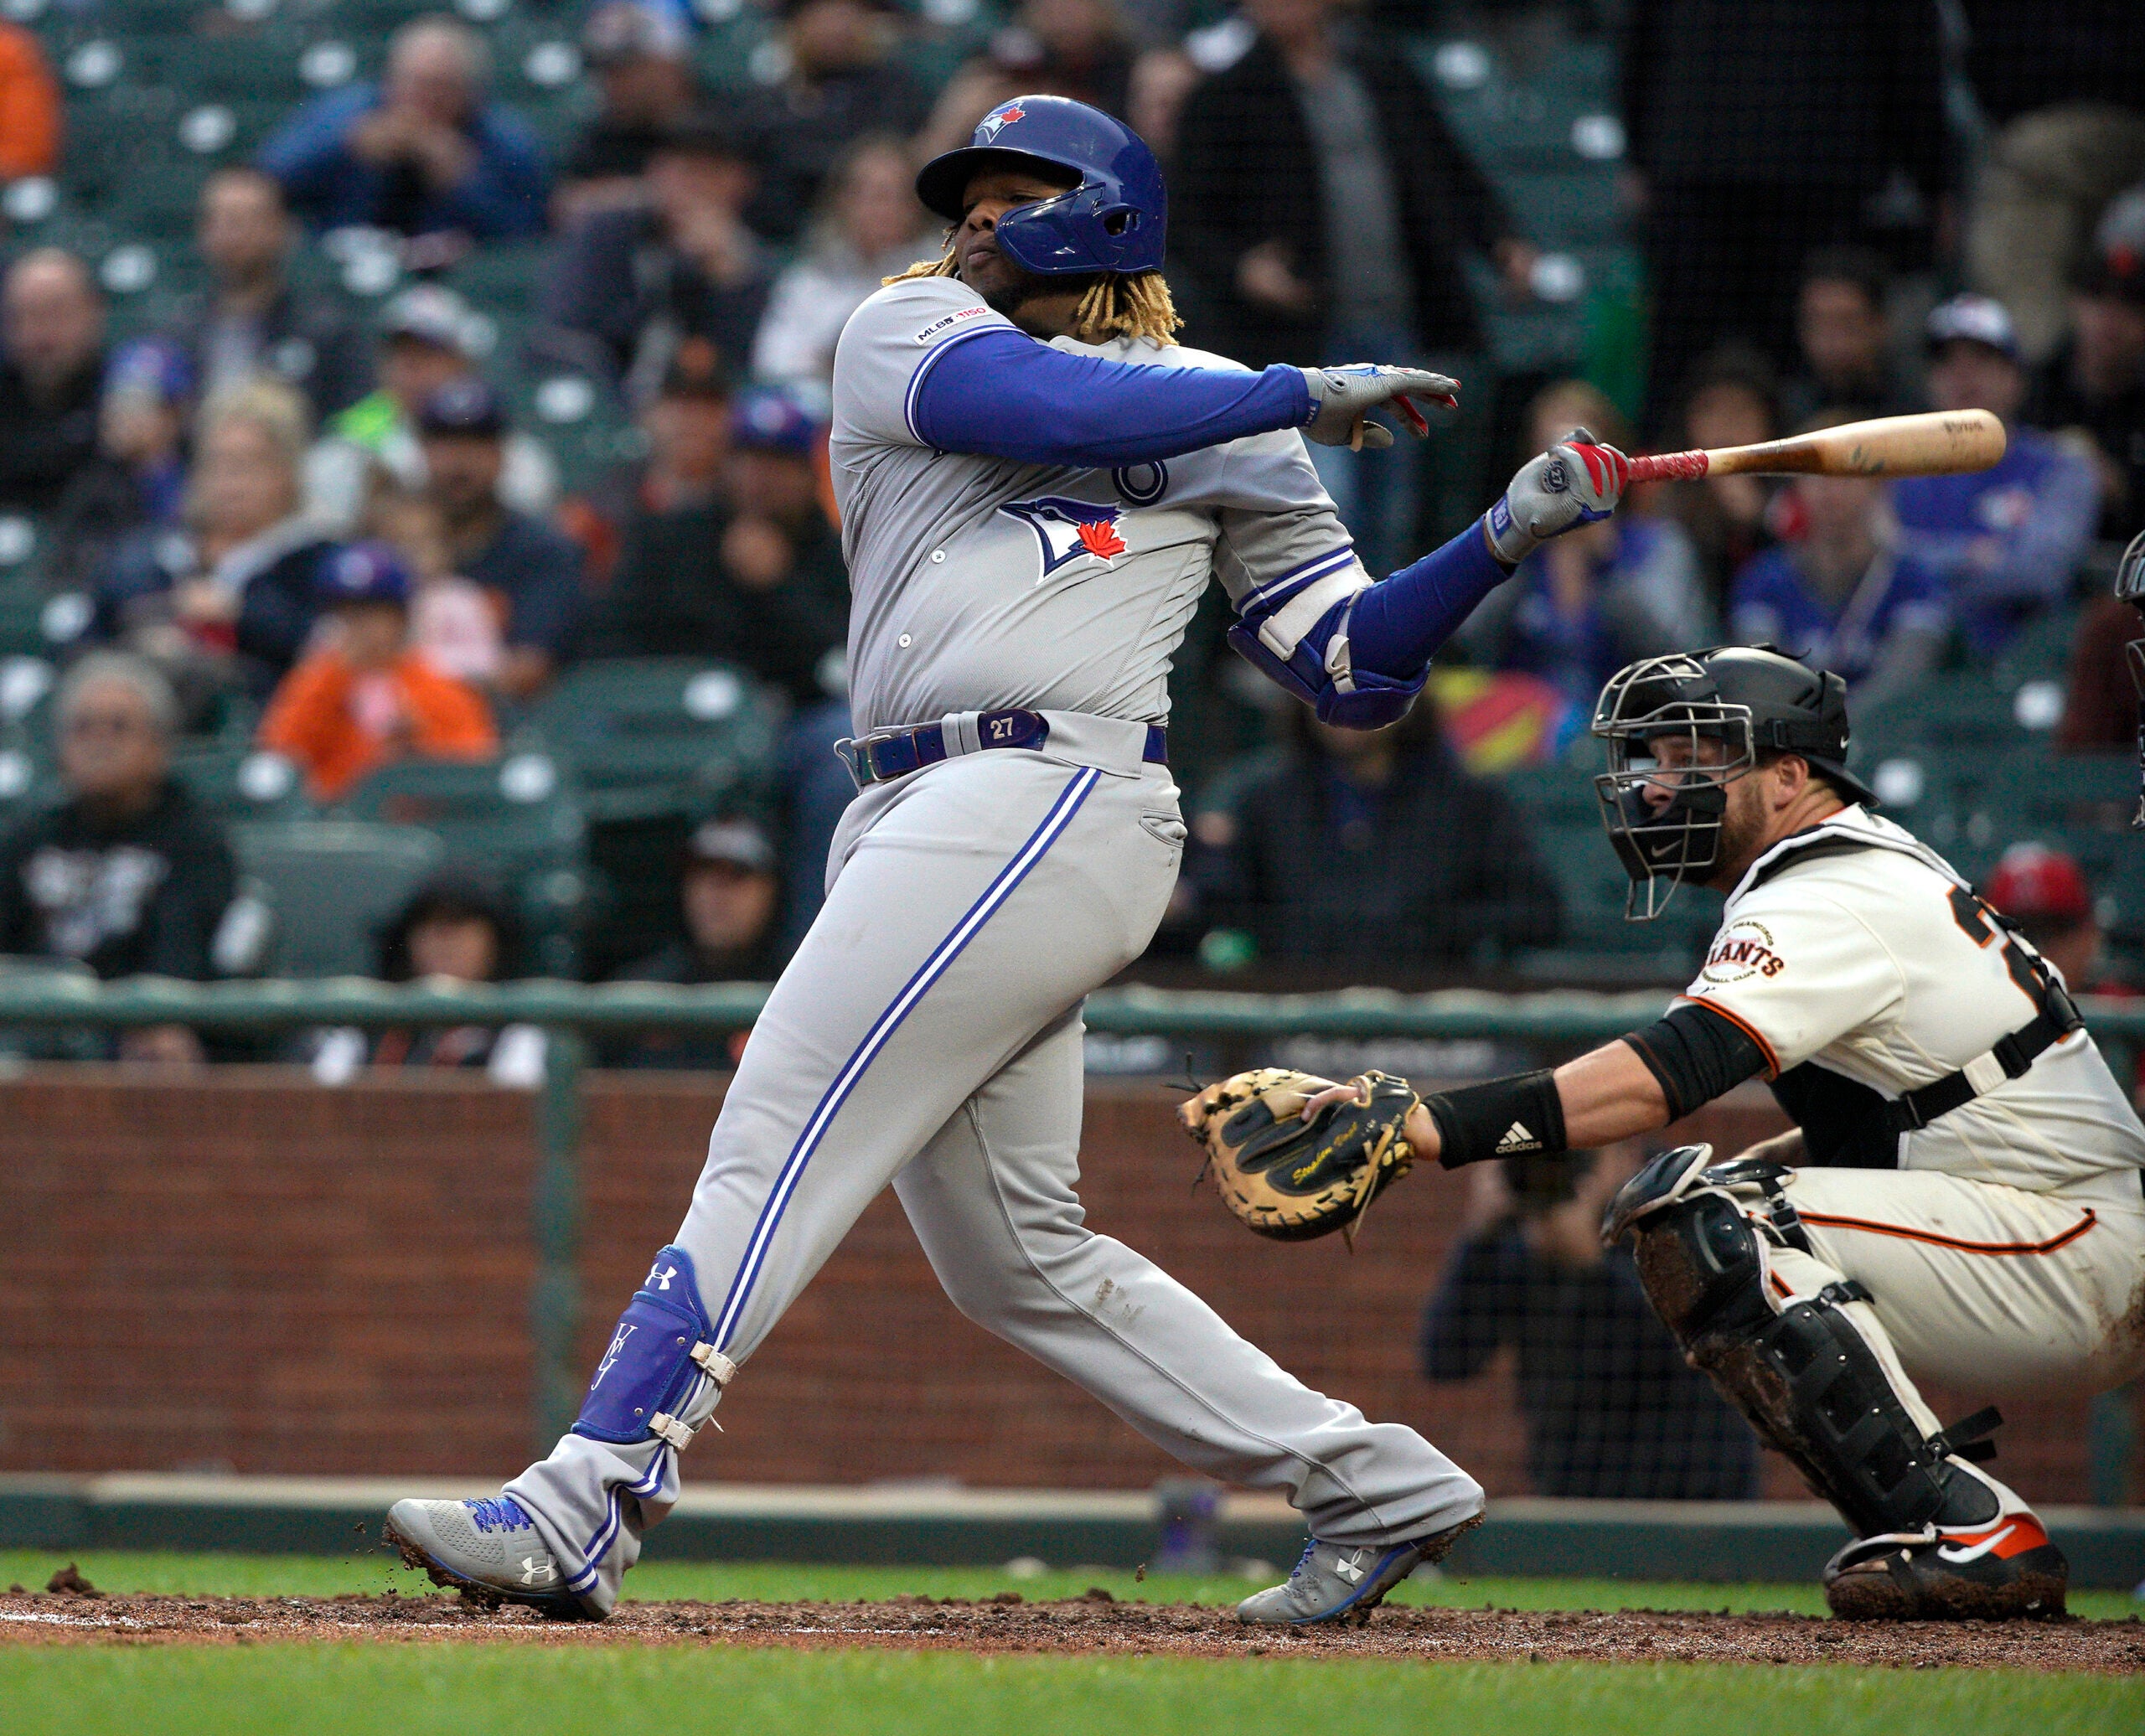 Pair of home runs help Blue Jays power past A's for 10th straight win